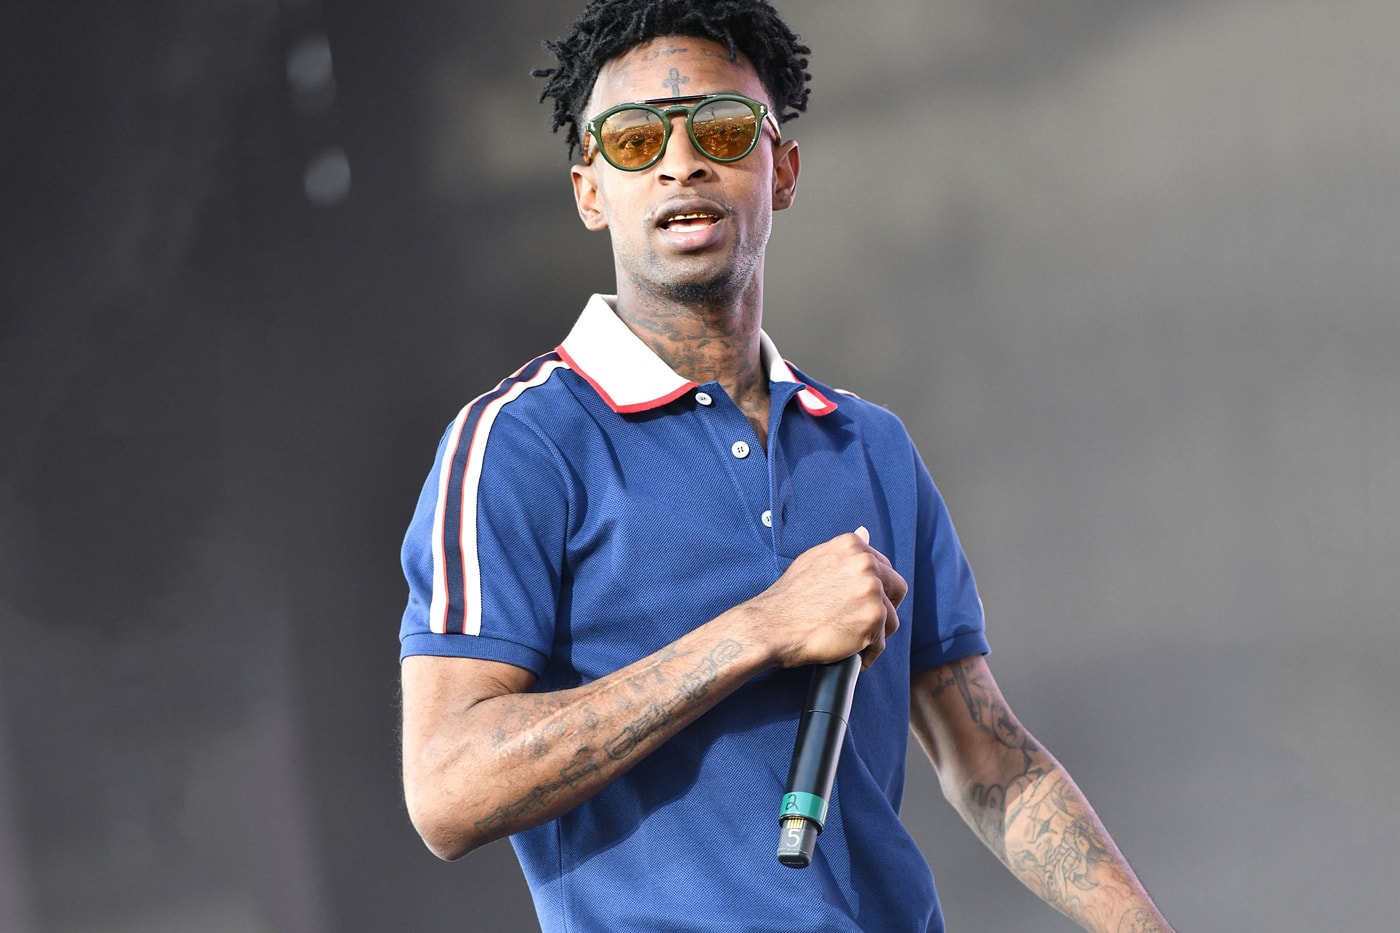 Have 21 Savage's Immigration Problems Finally Been Solved?